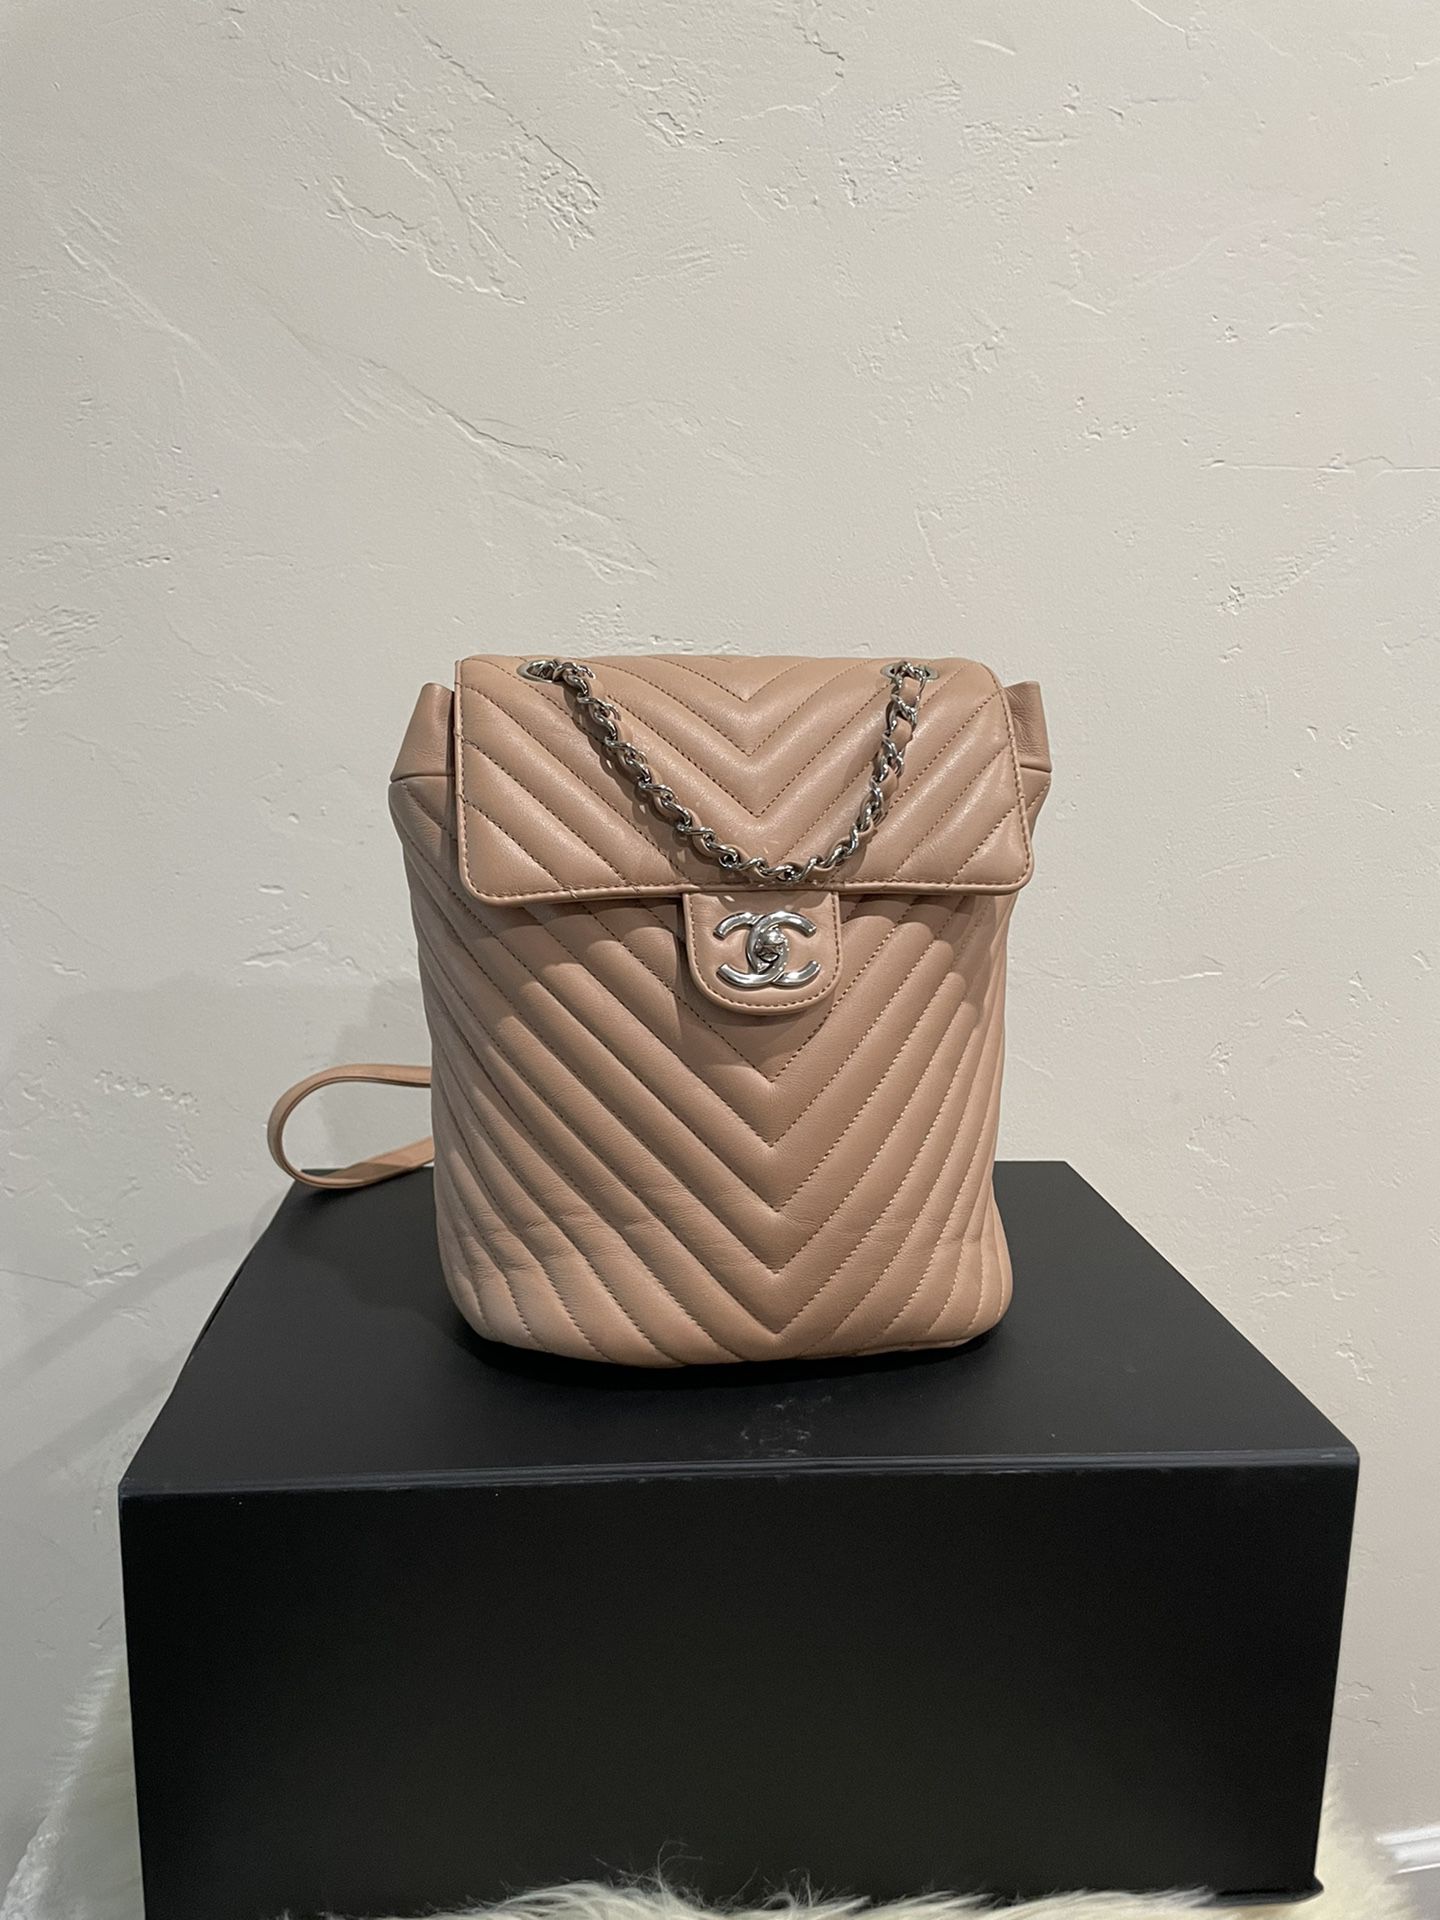 Chanel Backpack for Sale in Los Angeles, CA - OfferUp